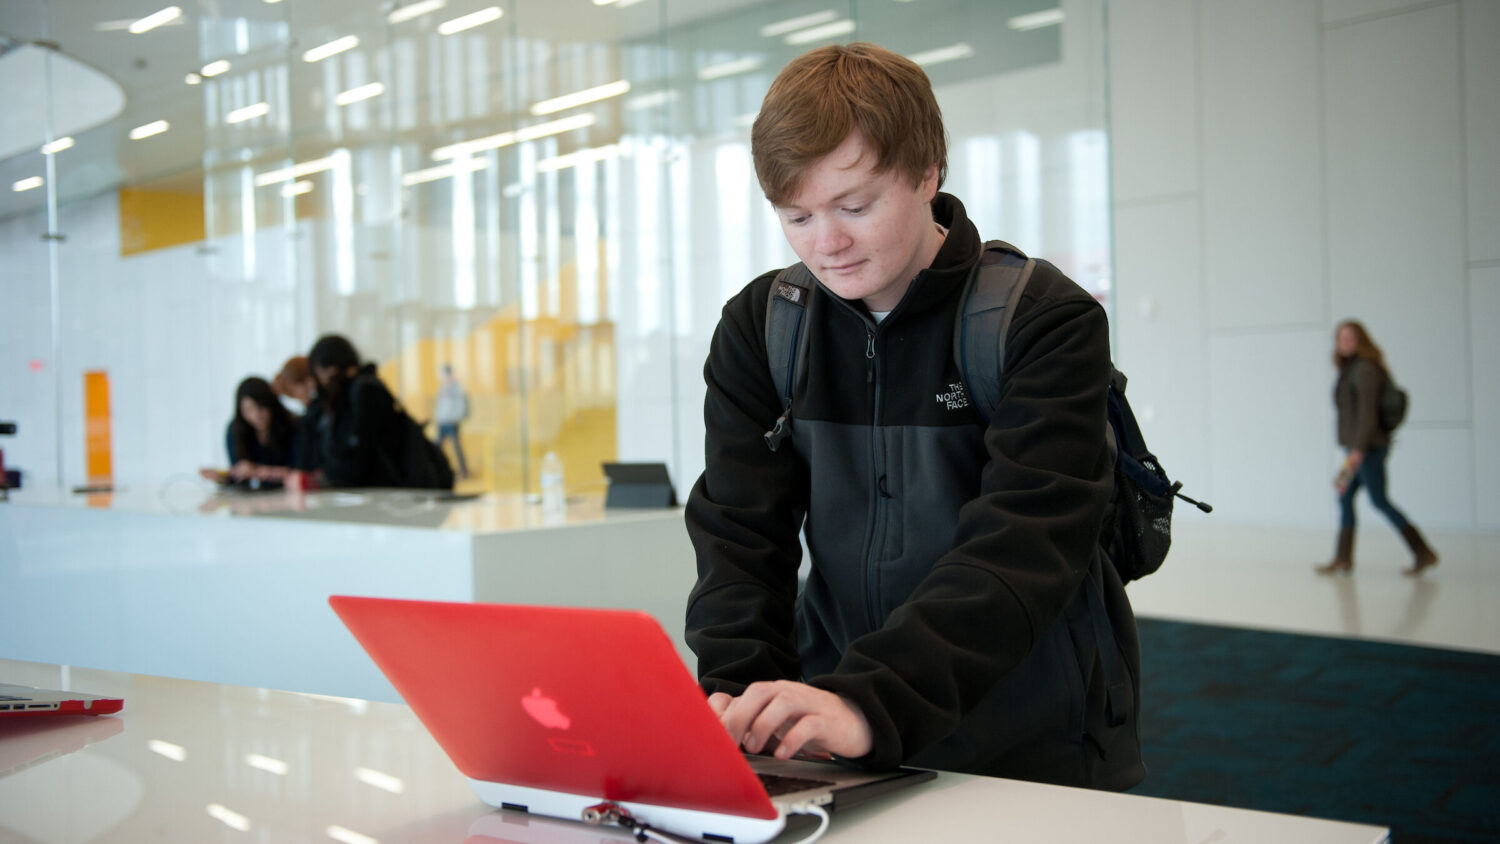 A student uses a laptop